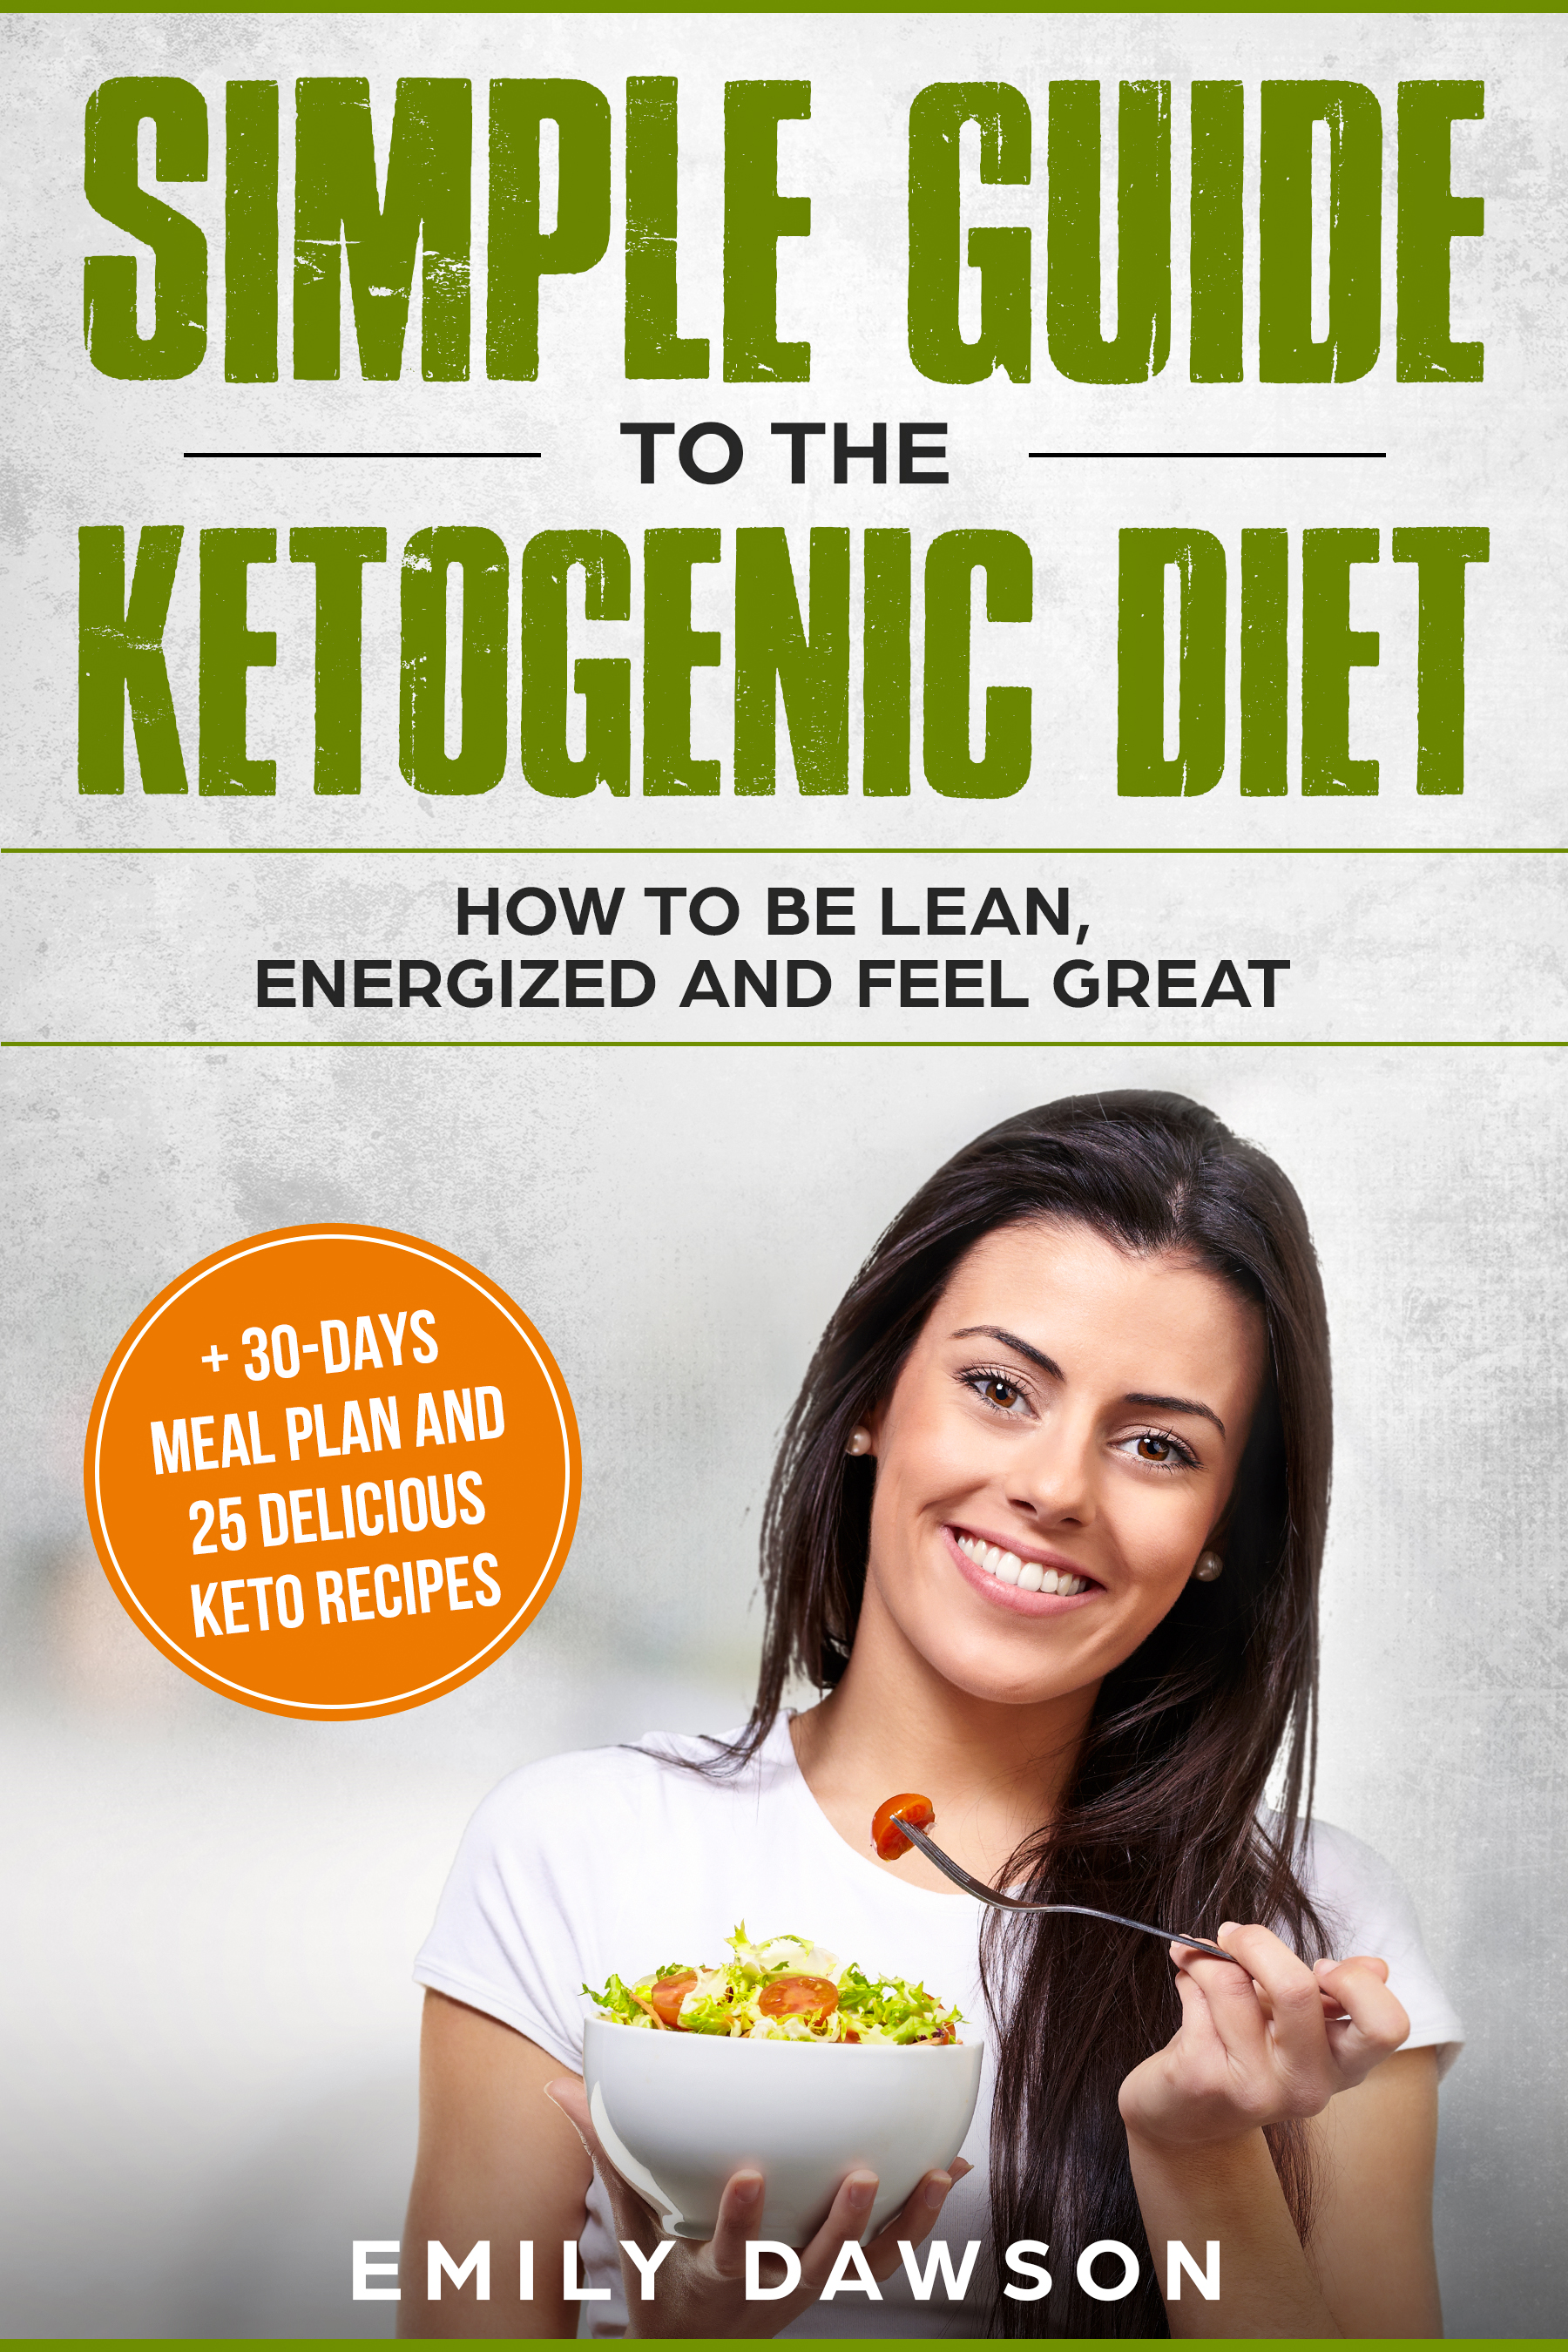 FREE: Simple guide to the ketogenic diet: how to be lean, energized and feel great by Emily Dawson